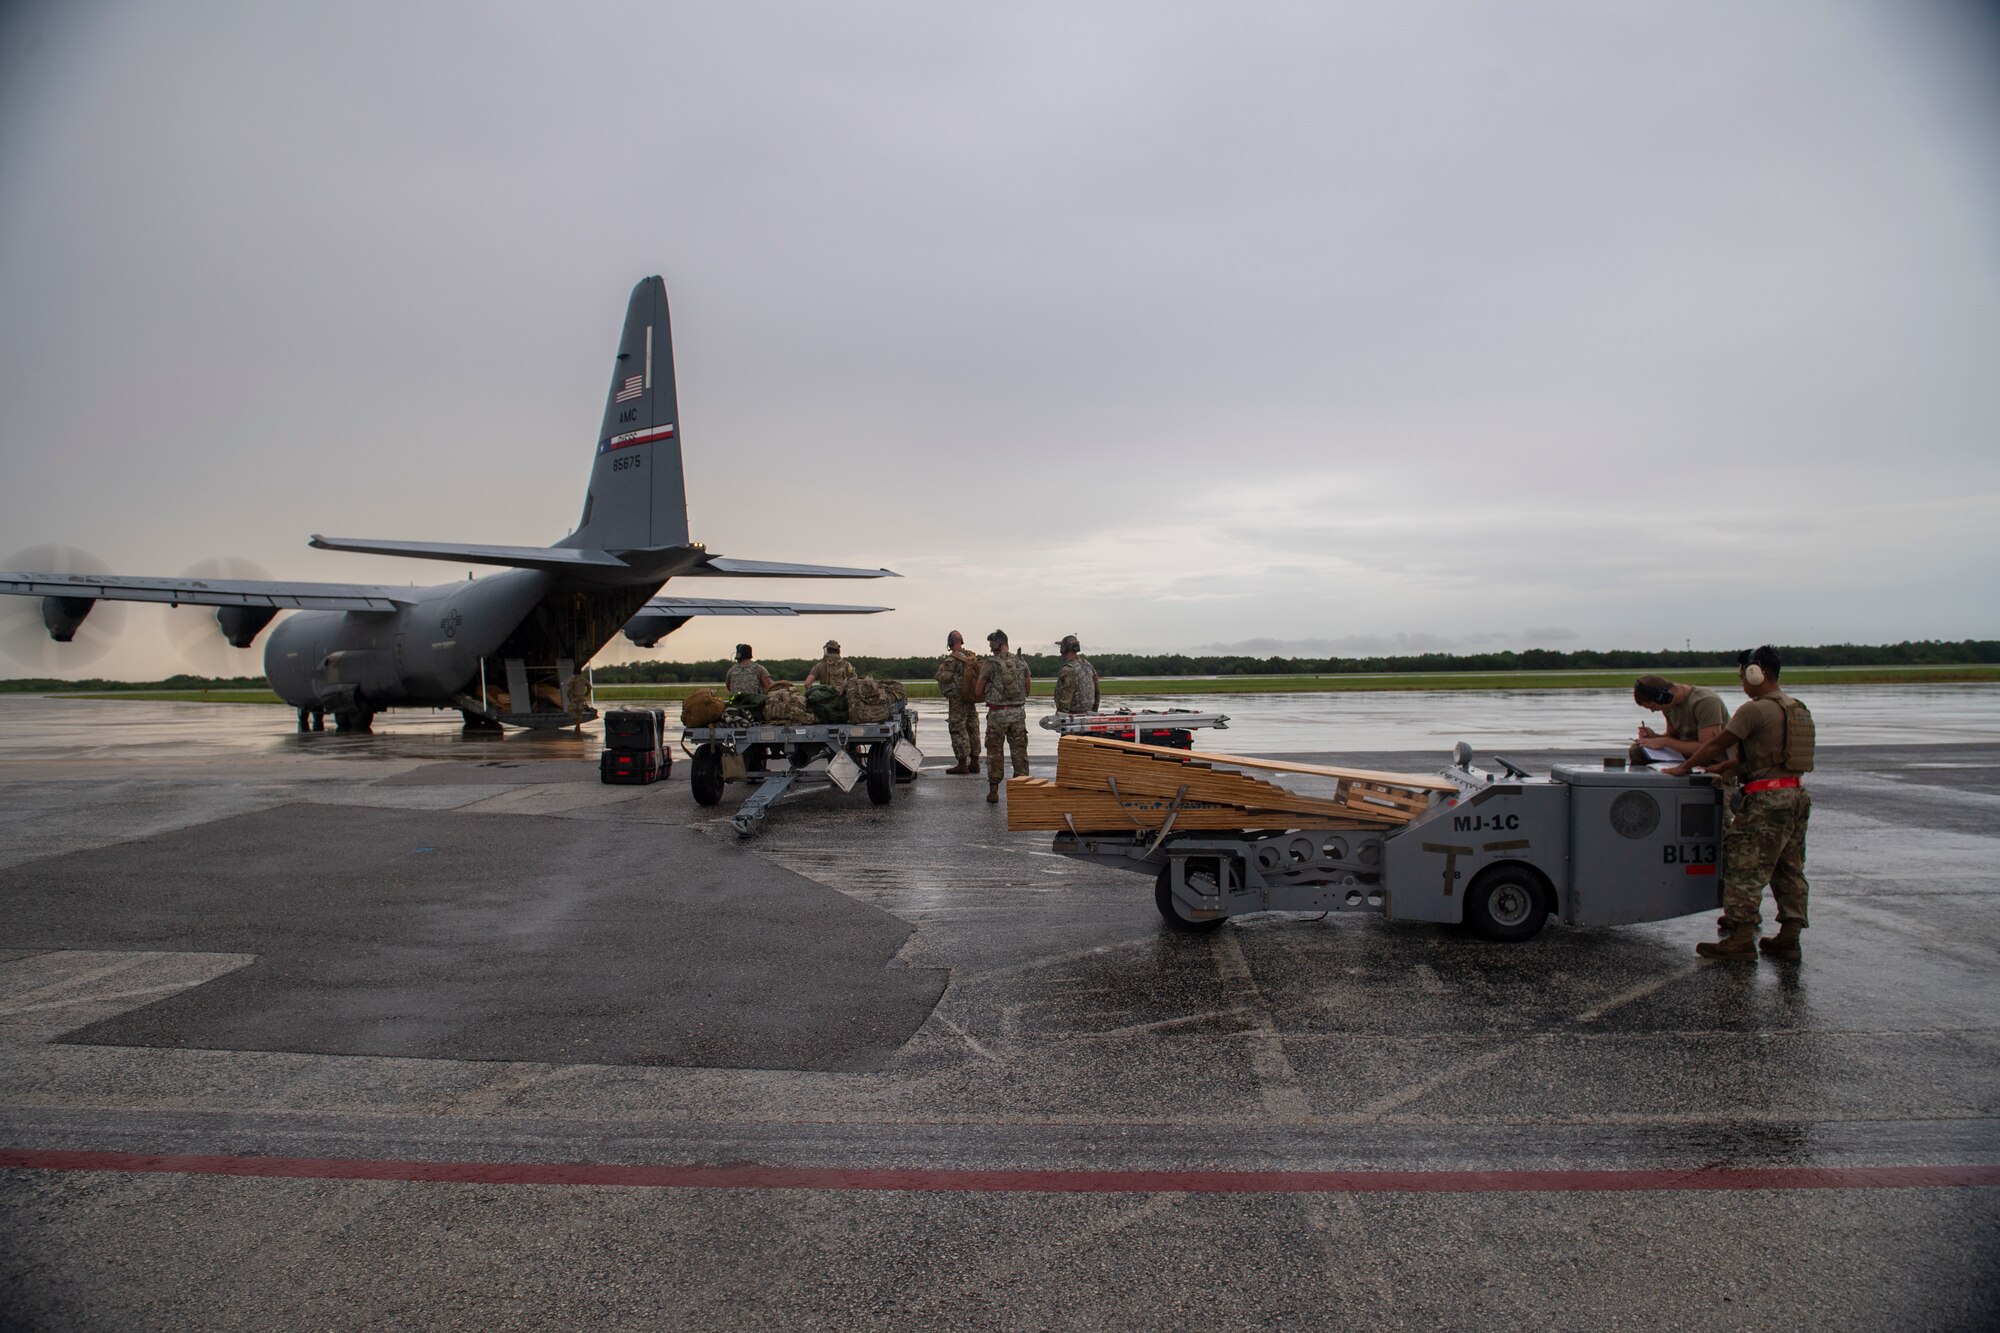 A photo of an aircraft in the back ground of the photo, a grey/yellow sunset, with airmen and weapons load equipment in the foreground.